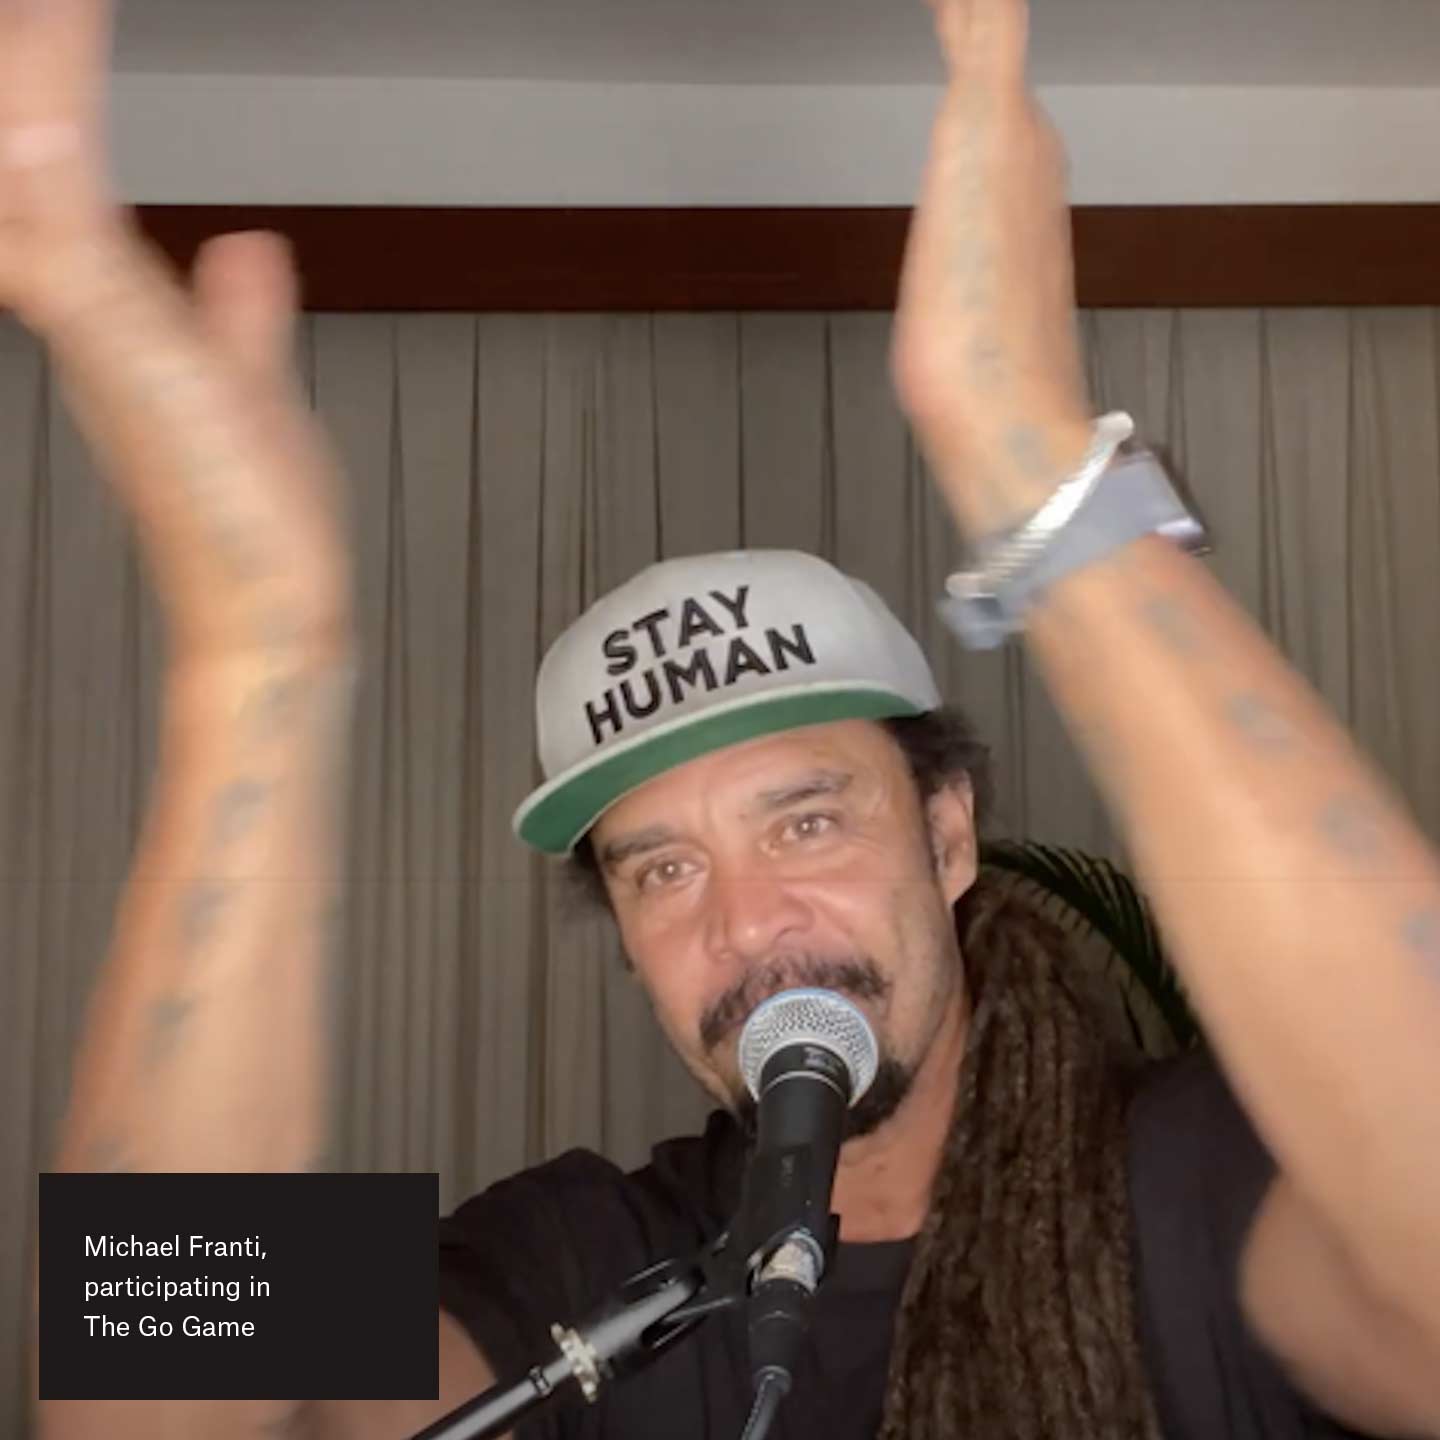 Michael Franti, participating in The Go Game